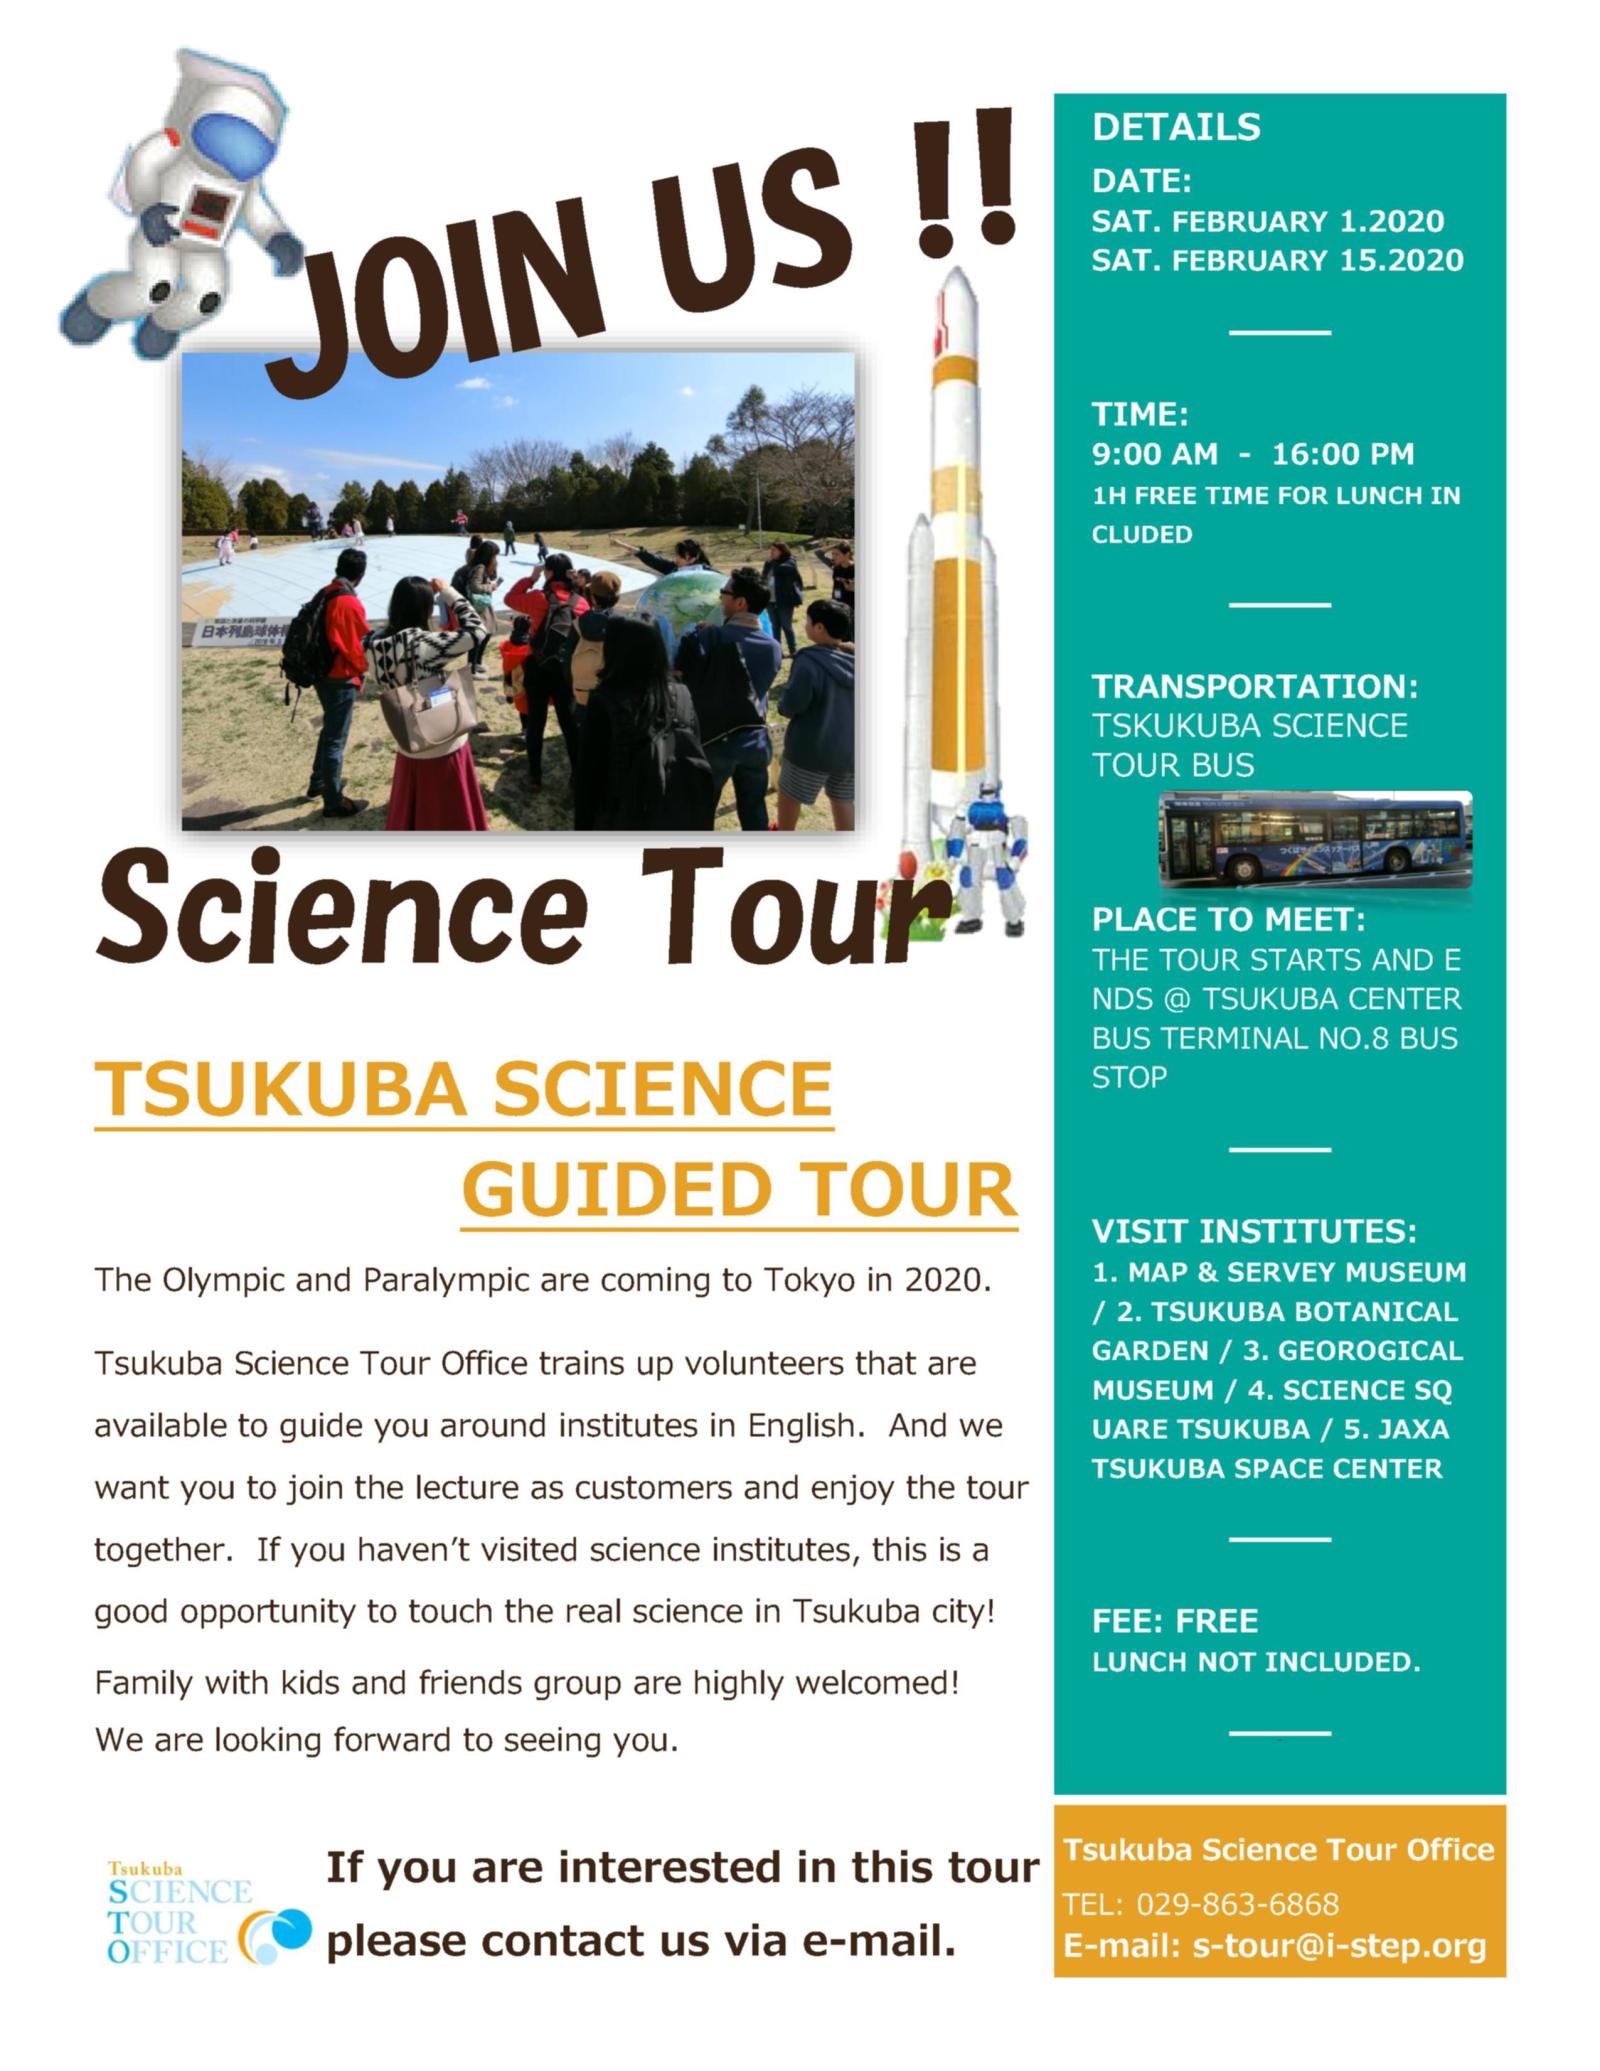 Join the Science Tour